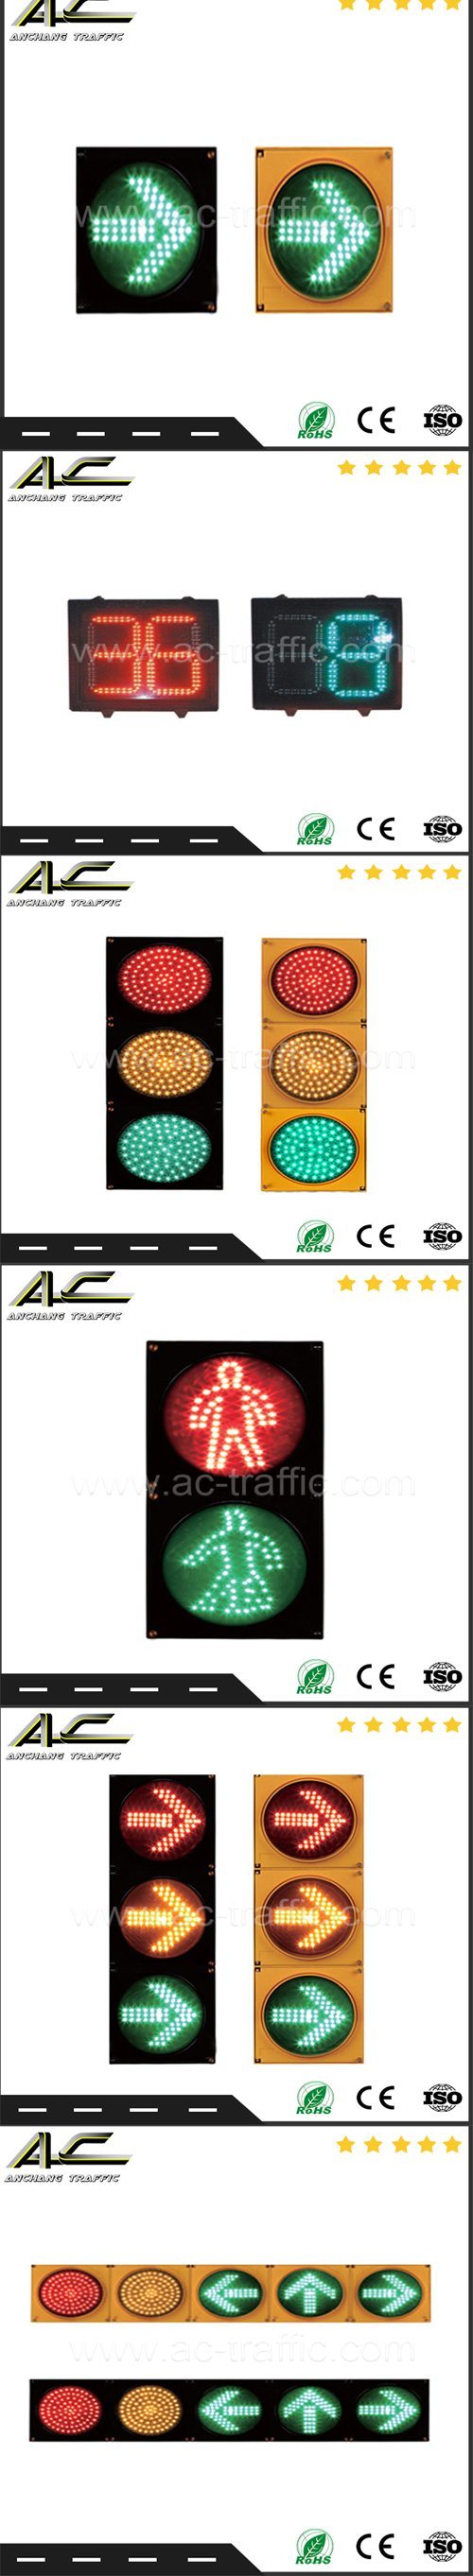 Approved Flashing Lane Control Traffic Signal Light with Red Cross & Green Arrow